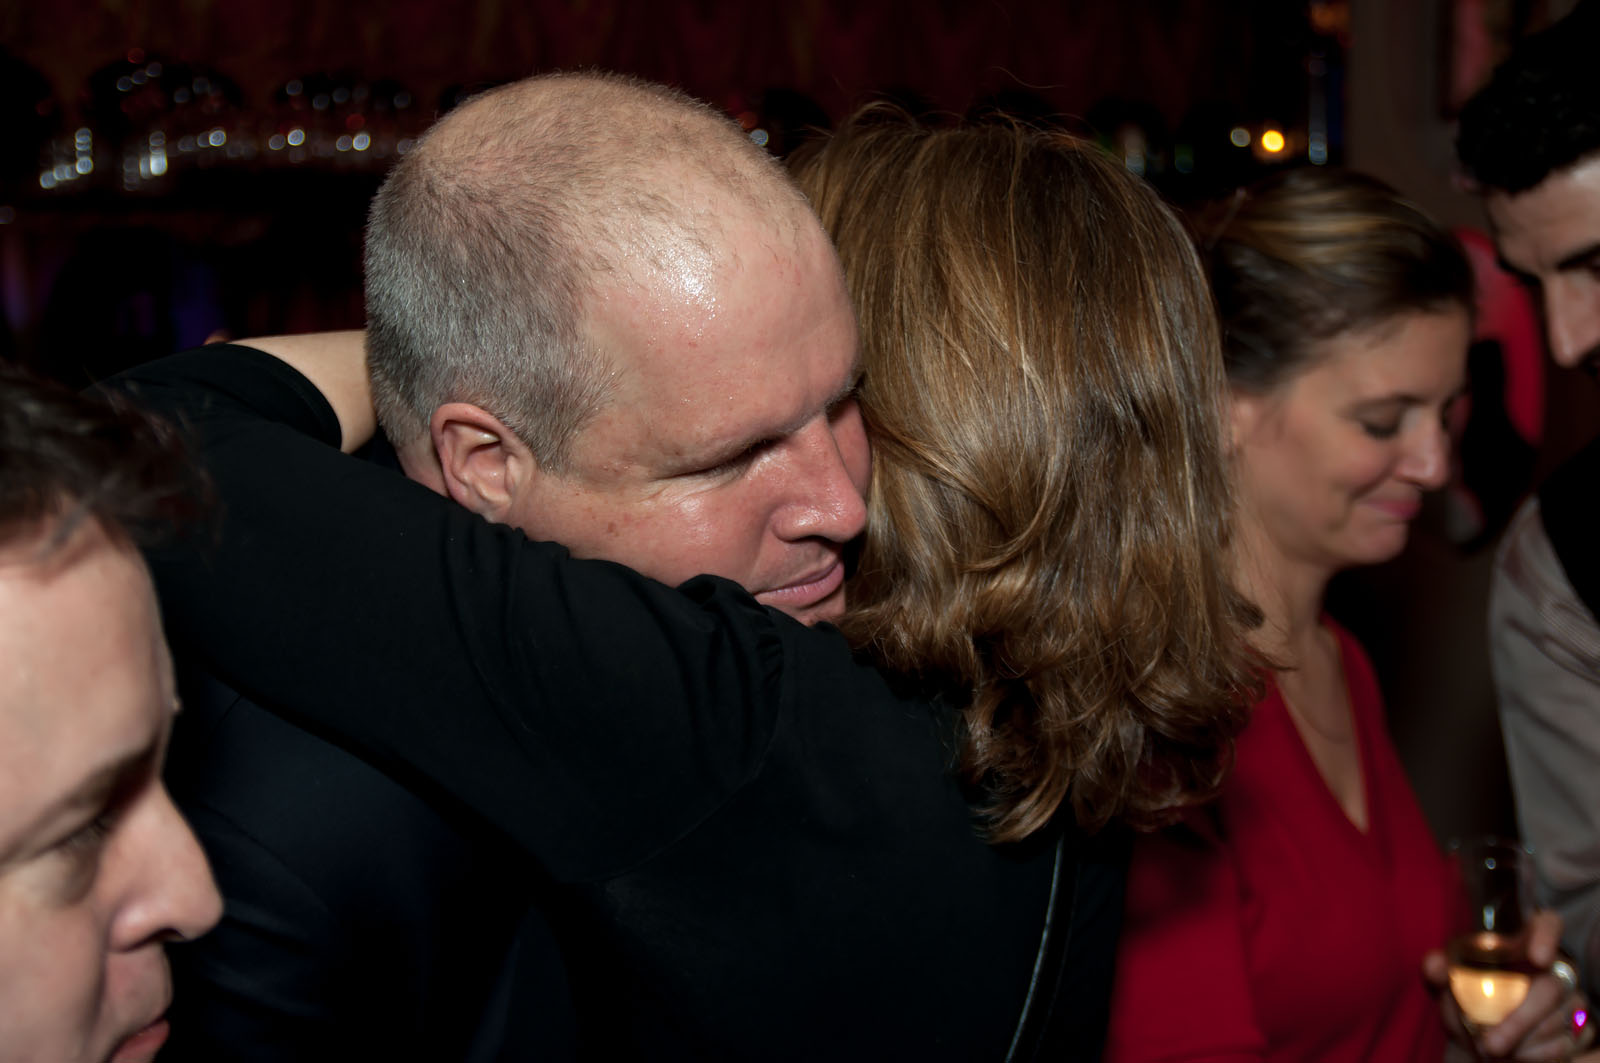 Not Your Usual NYC Wedding Photographs: Fine Art, Documentary, Unposed, Natural: the Hug